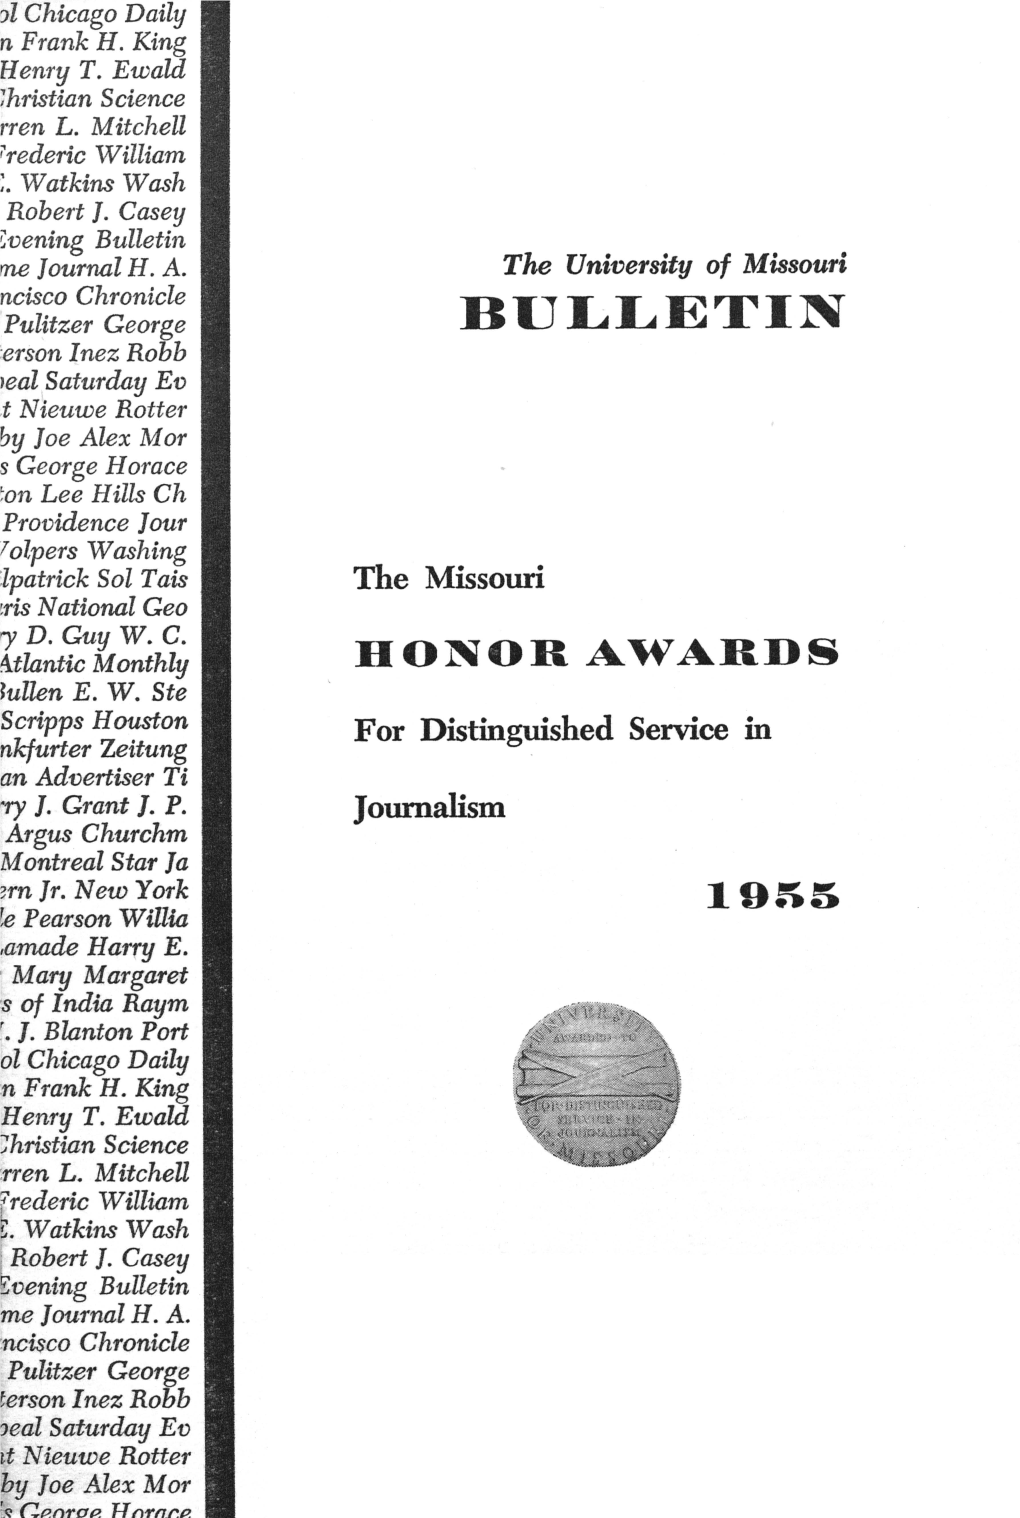 Missourijournalismhonormedal-1955